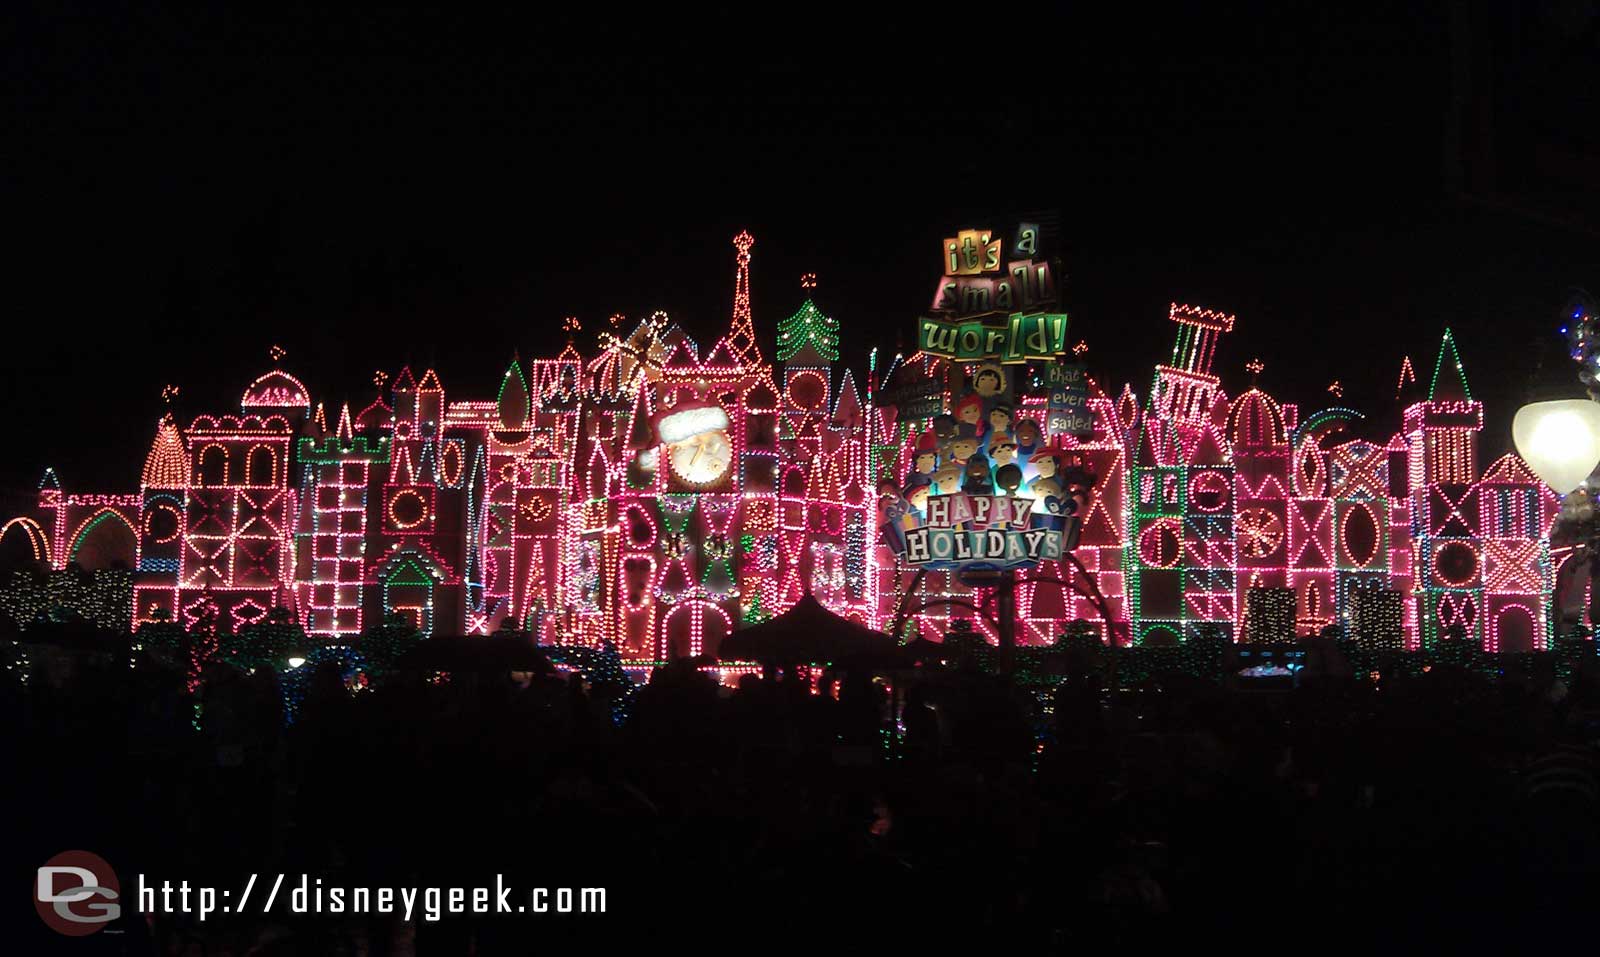 Small World Holiday this evening